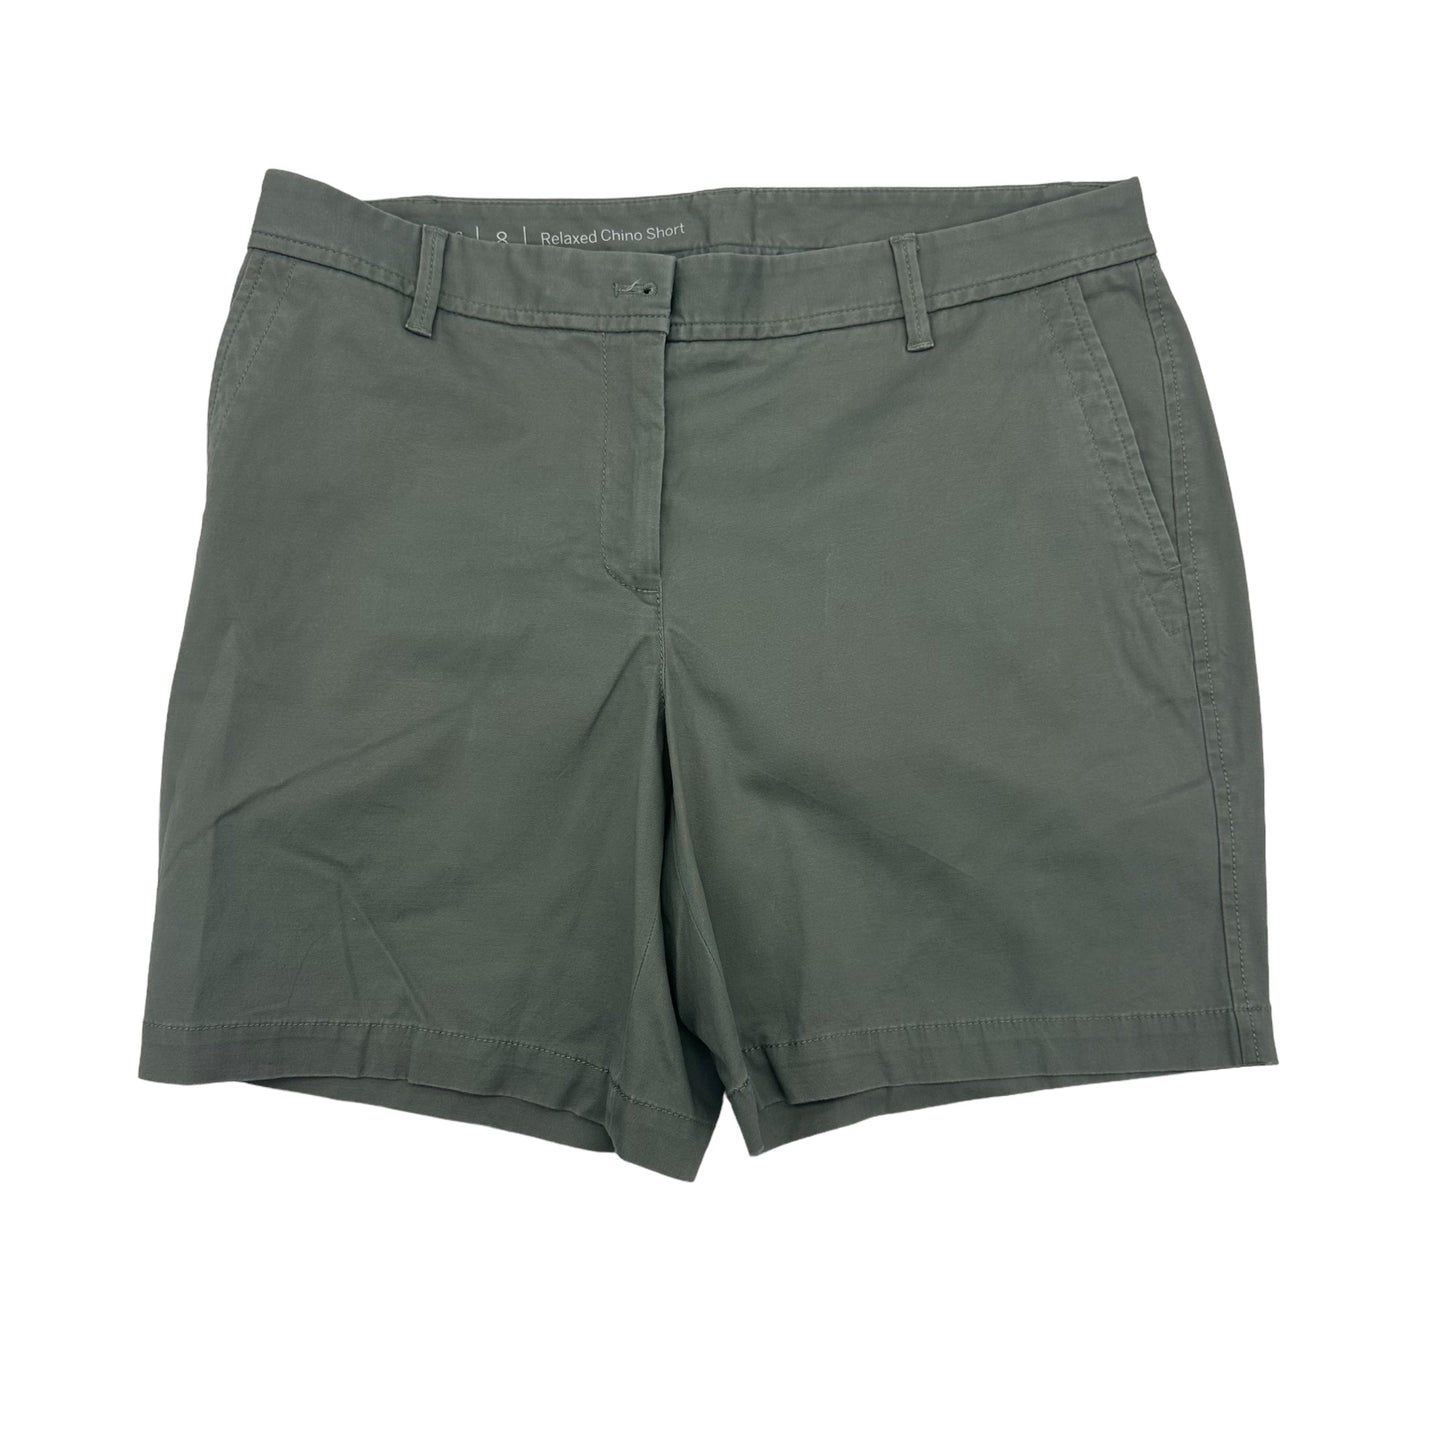 GREEN SHORTS by TALBOTS Size:8